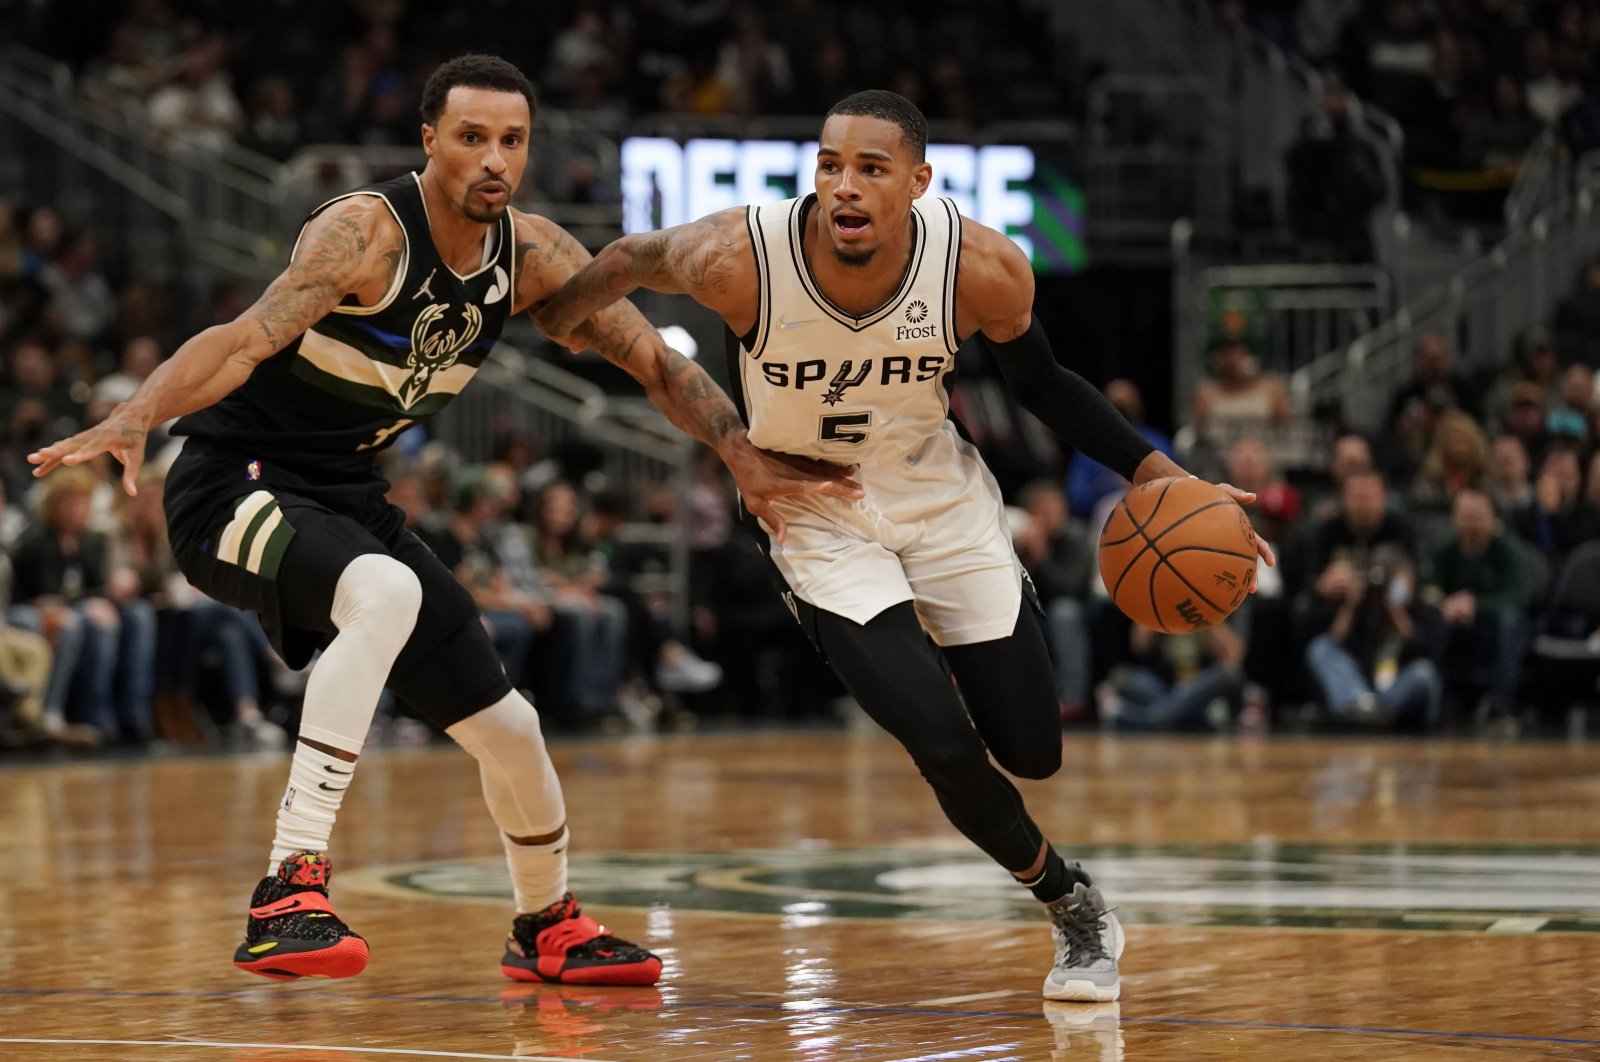 San Antonio Spurs Dejounte Murray (R) dribbles the ball against Milwaukee Bucks' George Hill (L) in the second half at Fiserv Forum, Milwaukee, Wisconsin, U.S., Oct. 30, 2021. (AFP Photo)